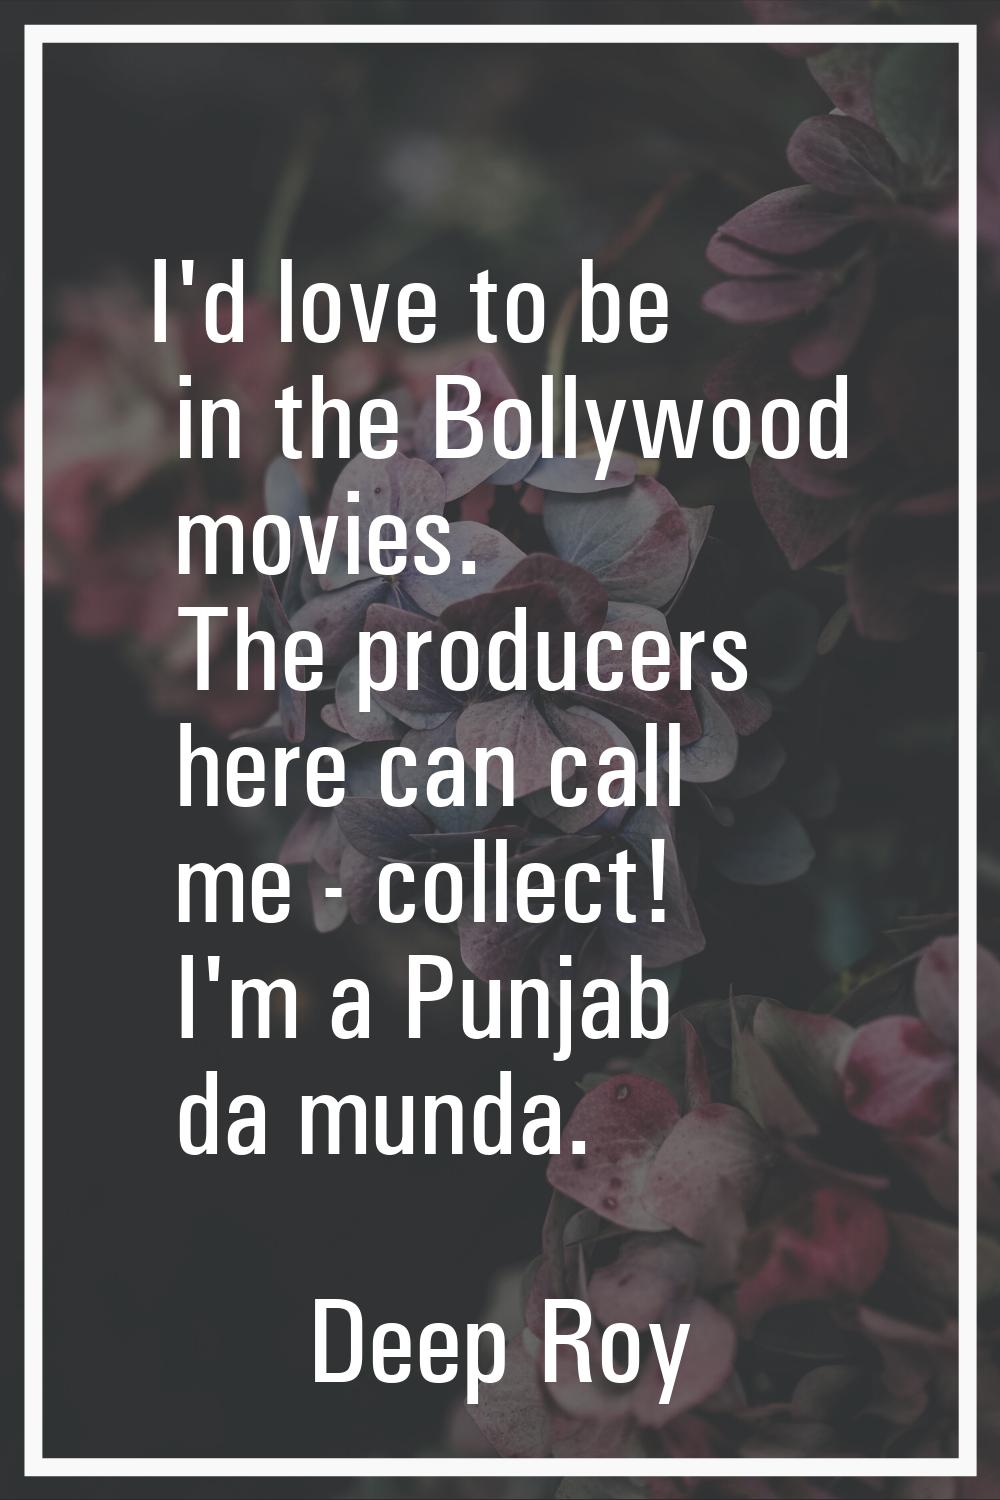 I'd love to be in the Bollywood movies. The producers here can call me - collect! I'm a Punjab da m